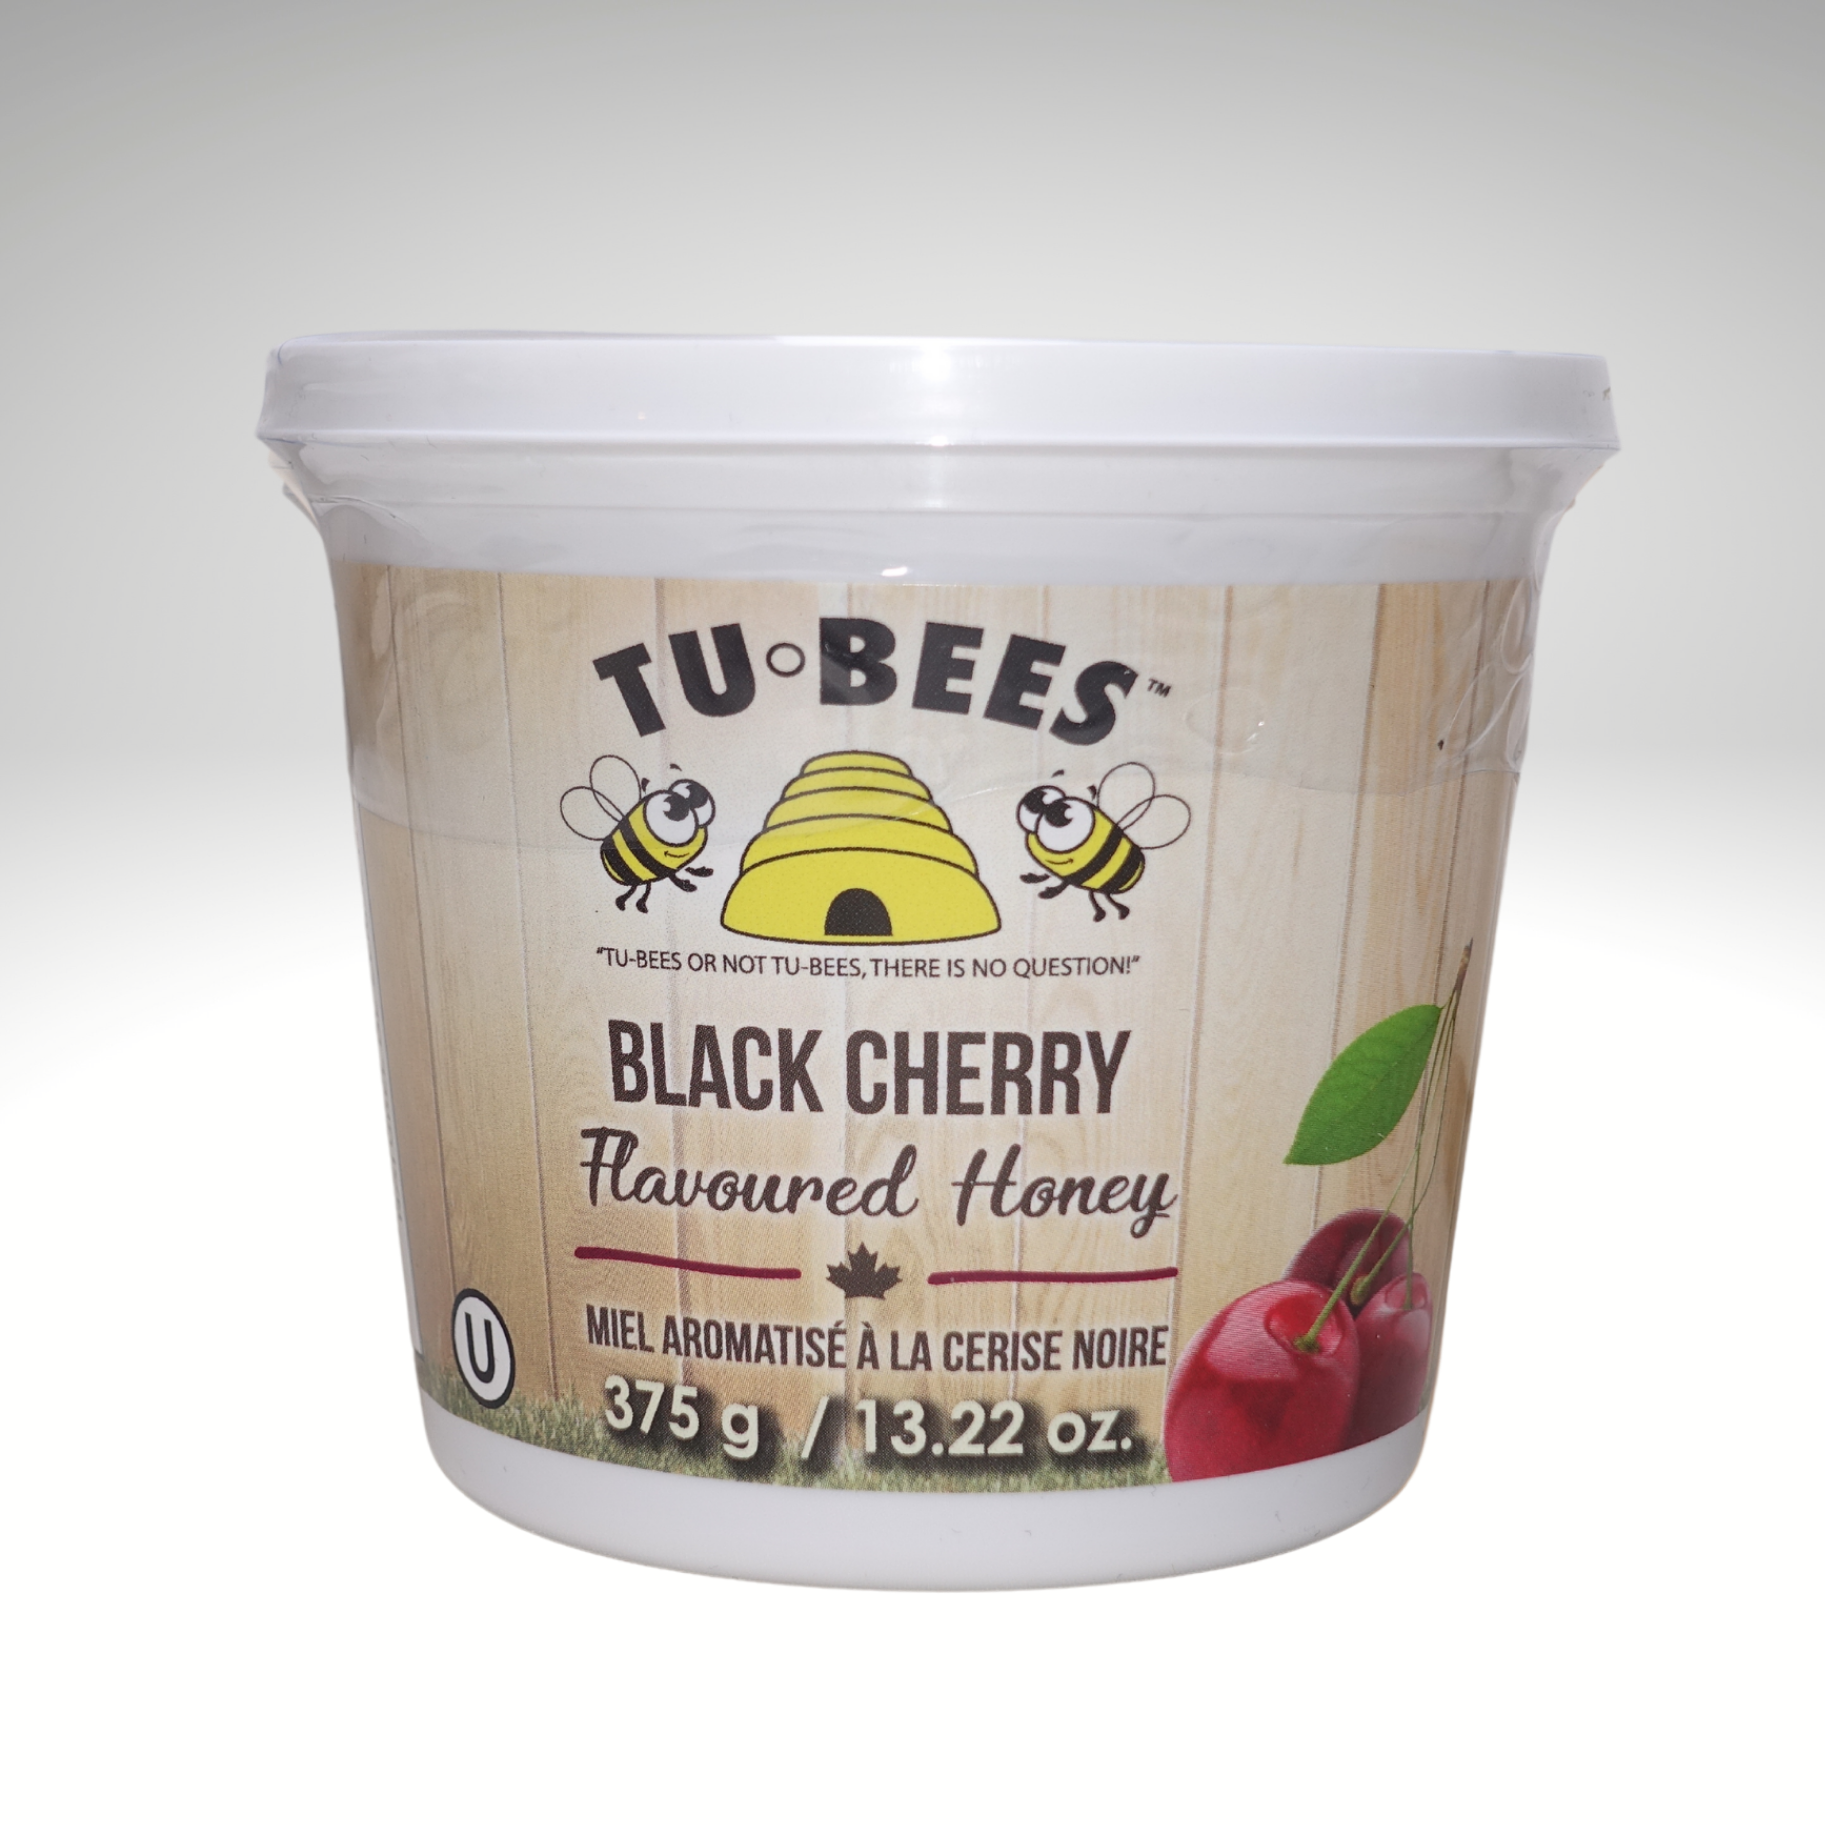 Tubees Honey, All Natural Black Cherry Flavoured, OU Kosher Certified, Canadian Women owned